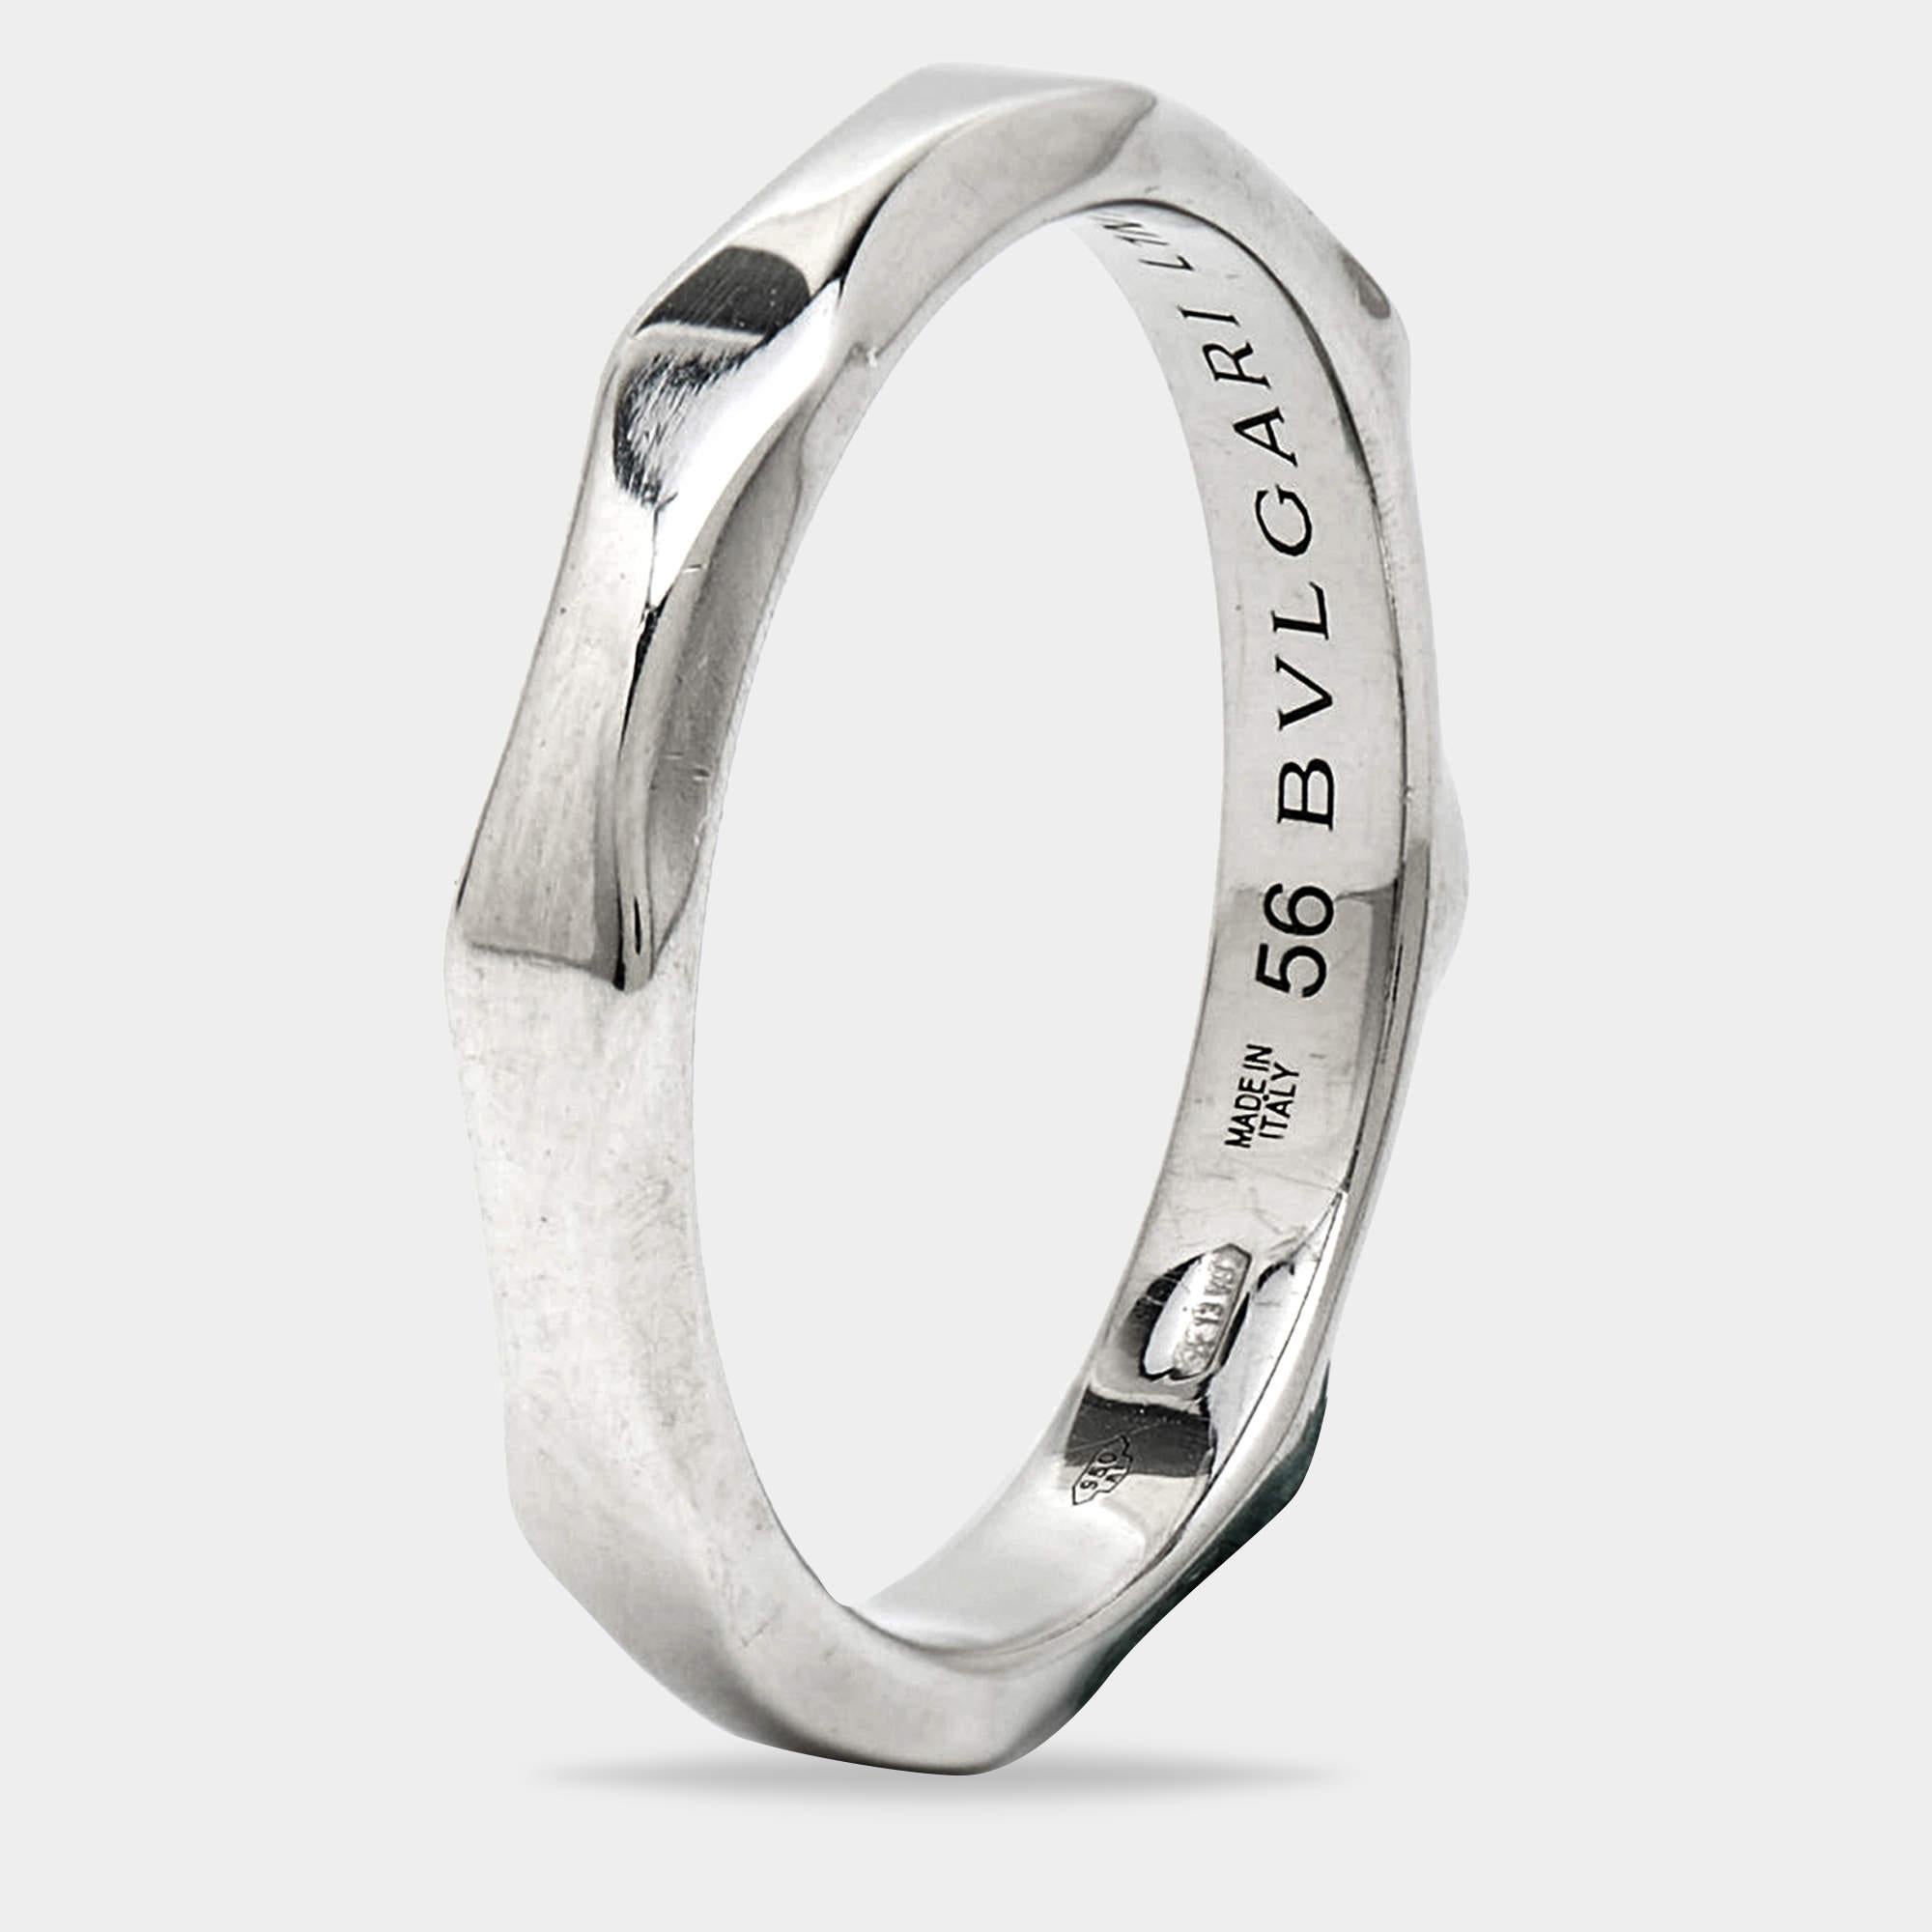 Aesthetic Movement Bvlgari Infinito Platinum Wedding Band Ring Size 56 For Sale